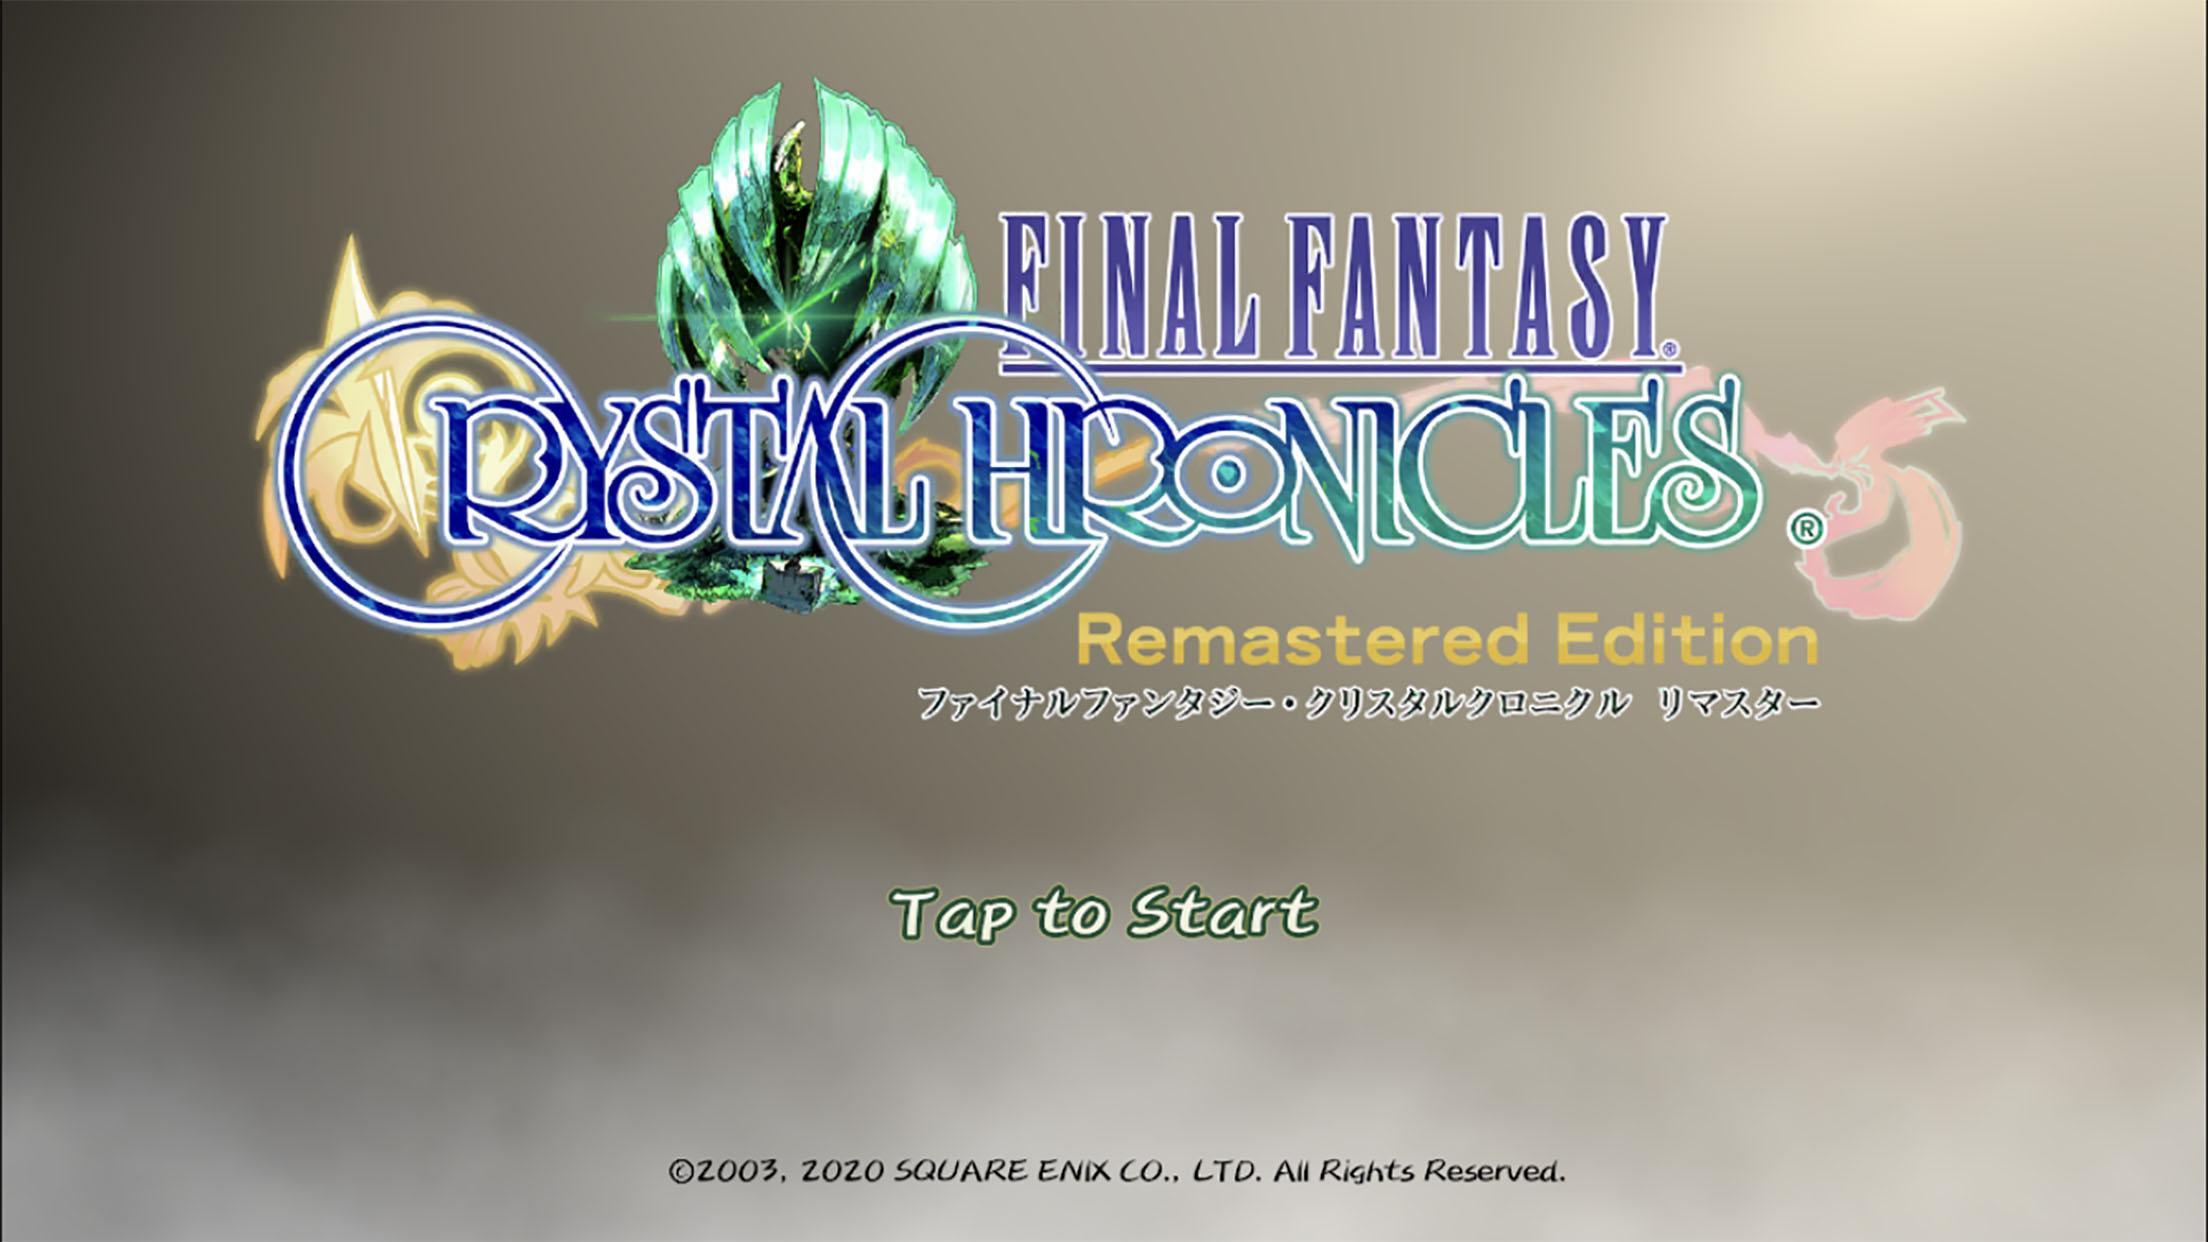 Finalfantasy Crystalchronicles For Android Apk Download